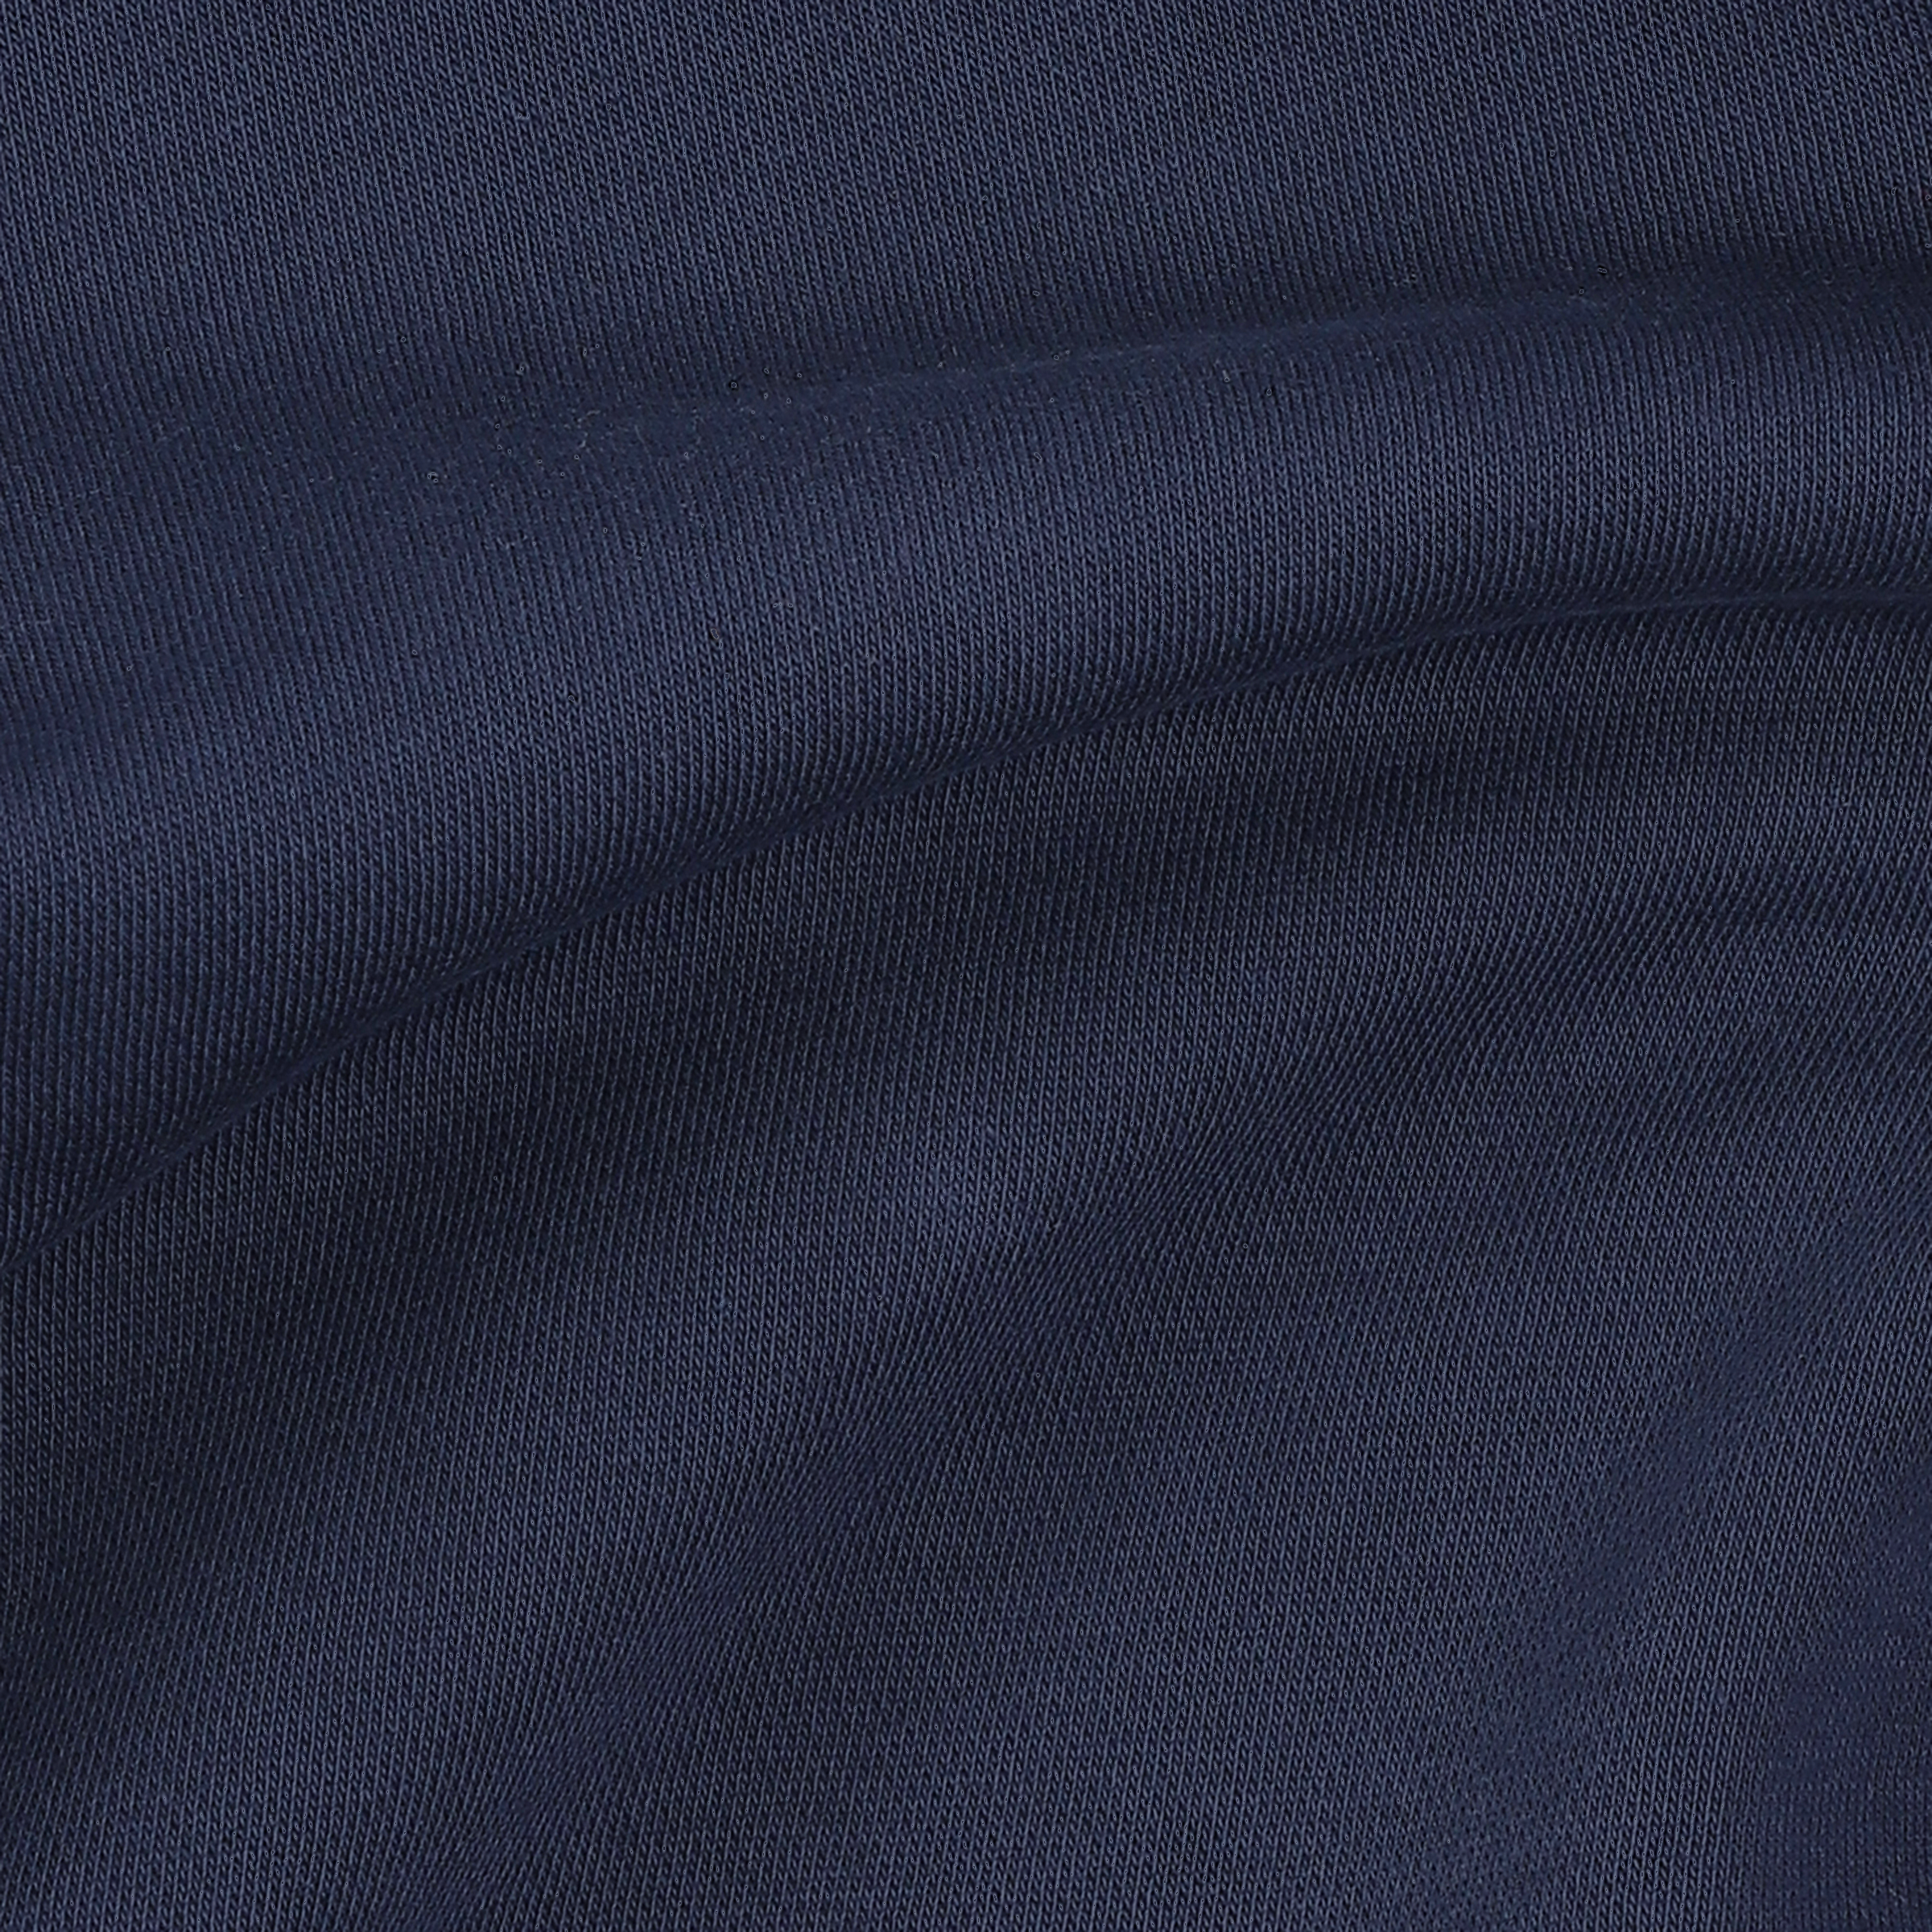 Oversized Hoodie Navy close up fabric